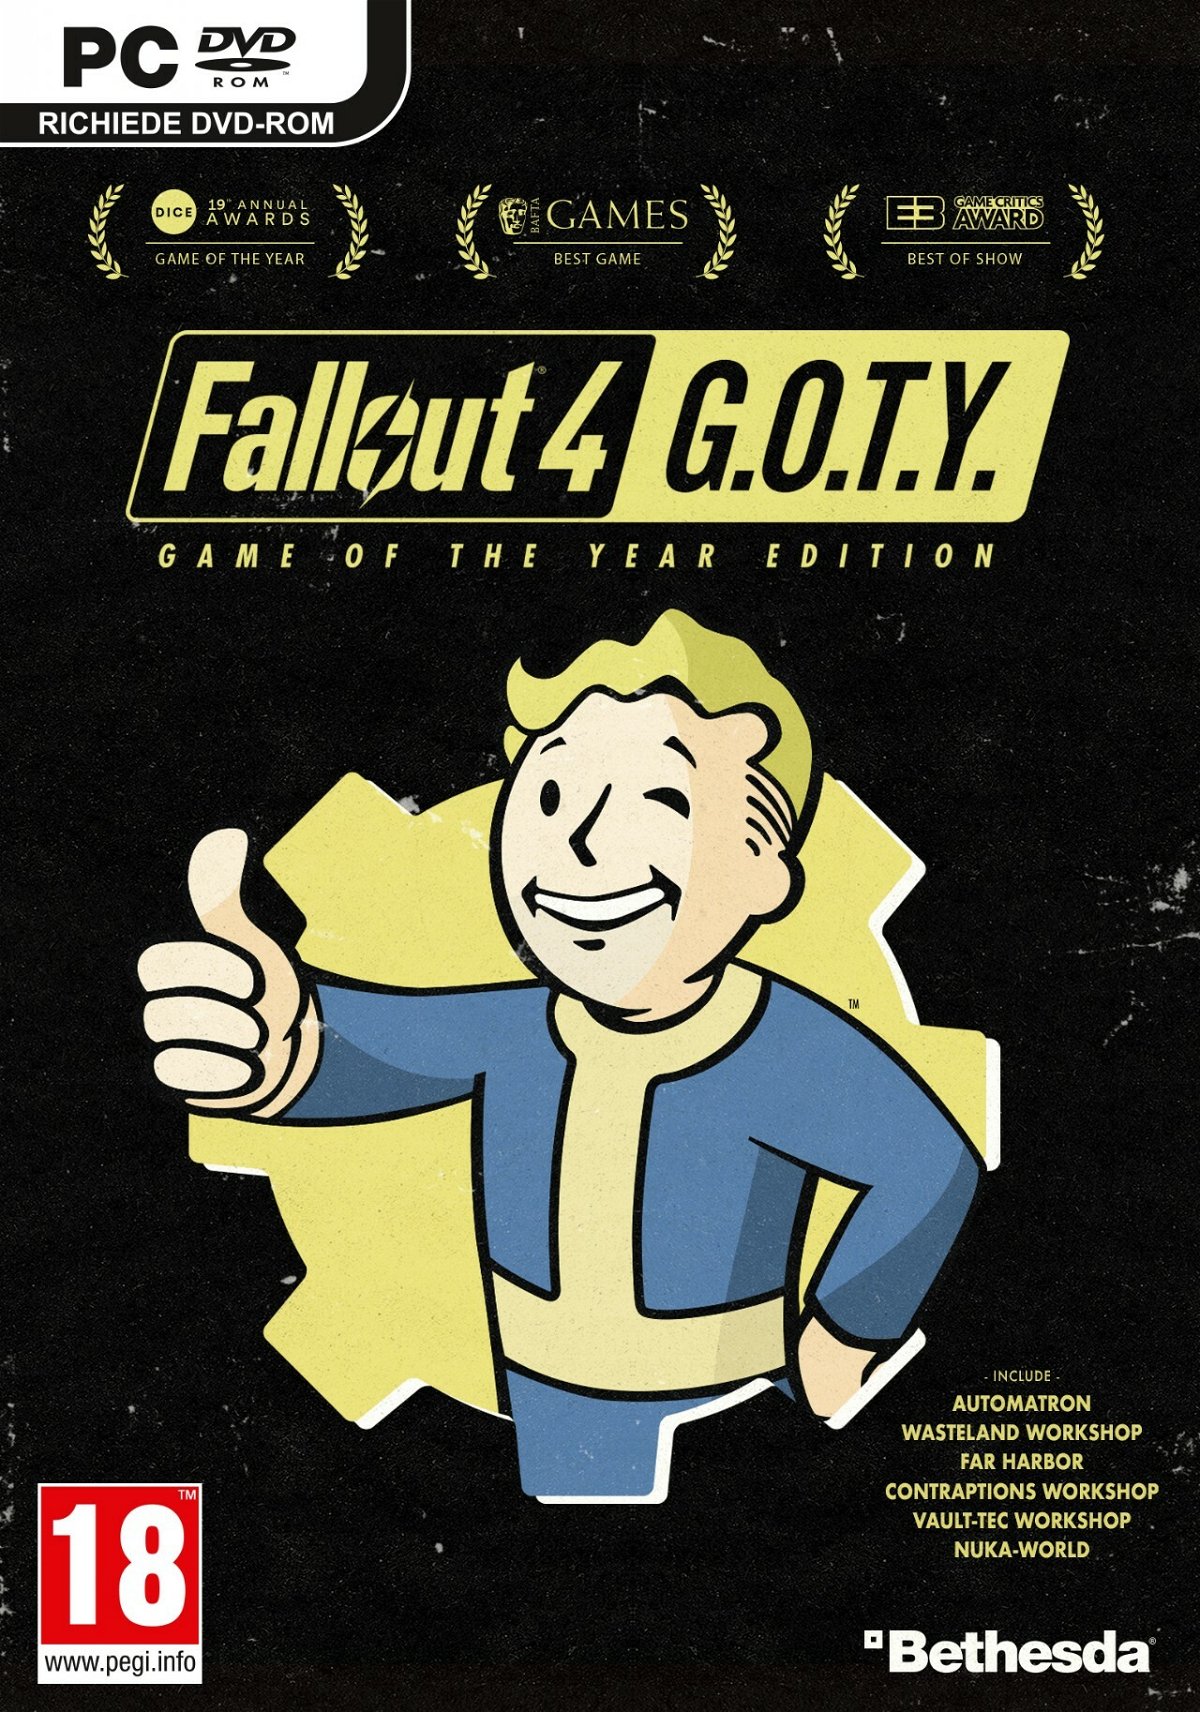 Fallout 4: Game of the Year Edition è ufficiale